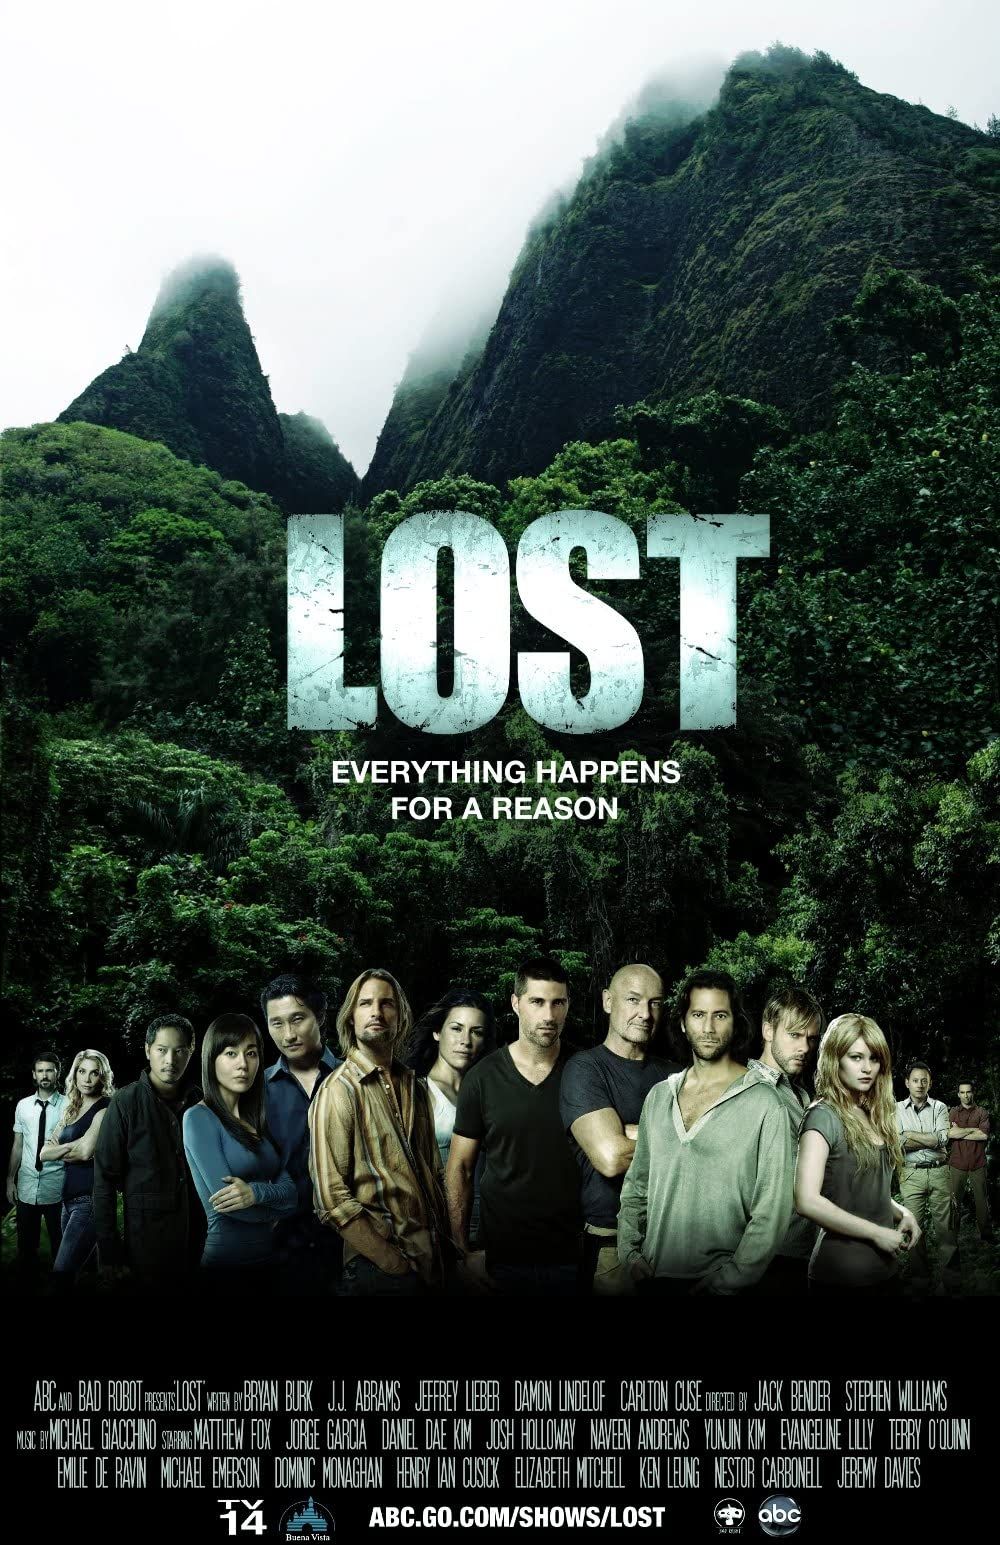 Promotional image for ABC's LOST